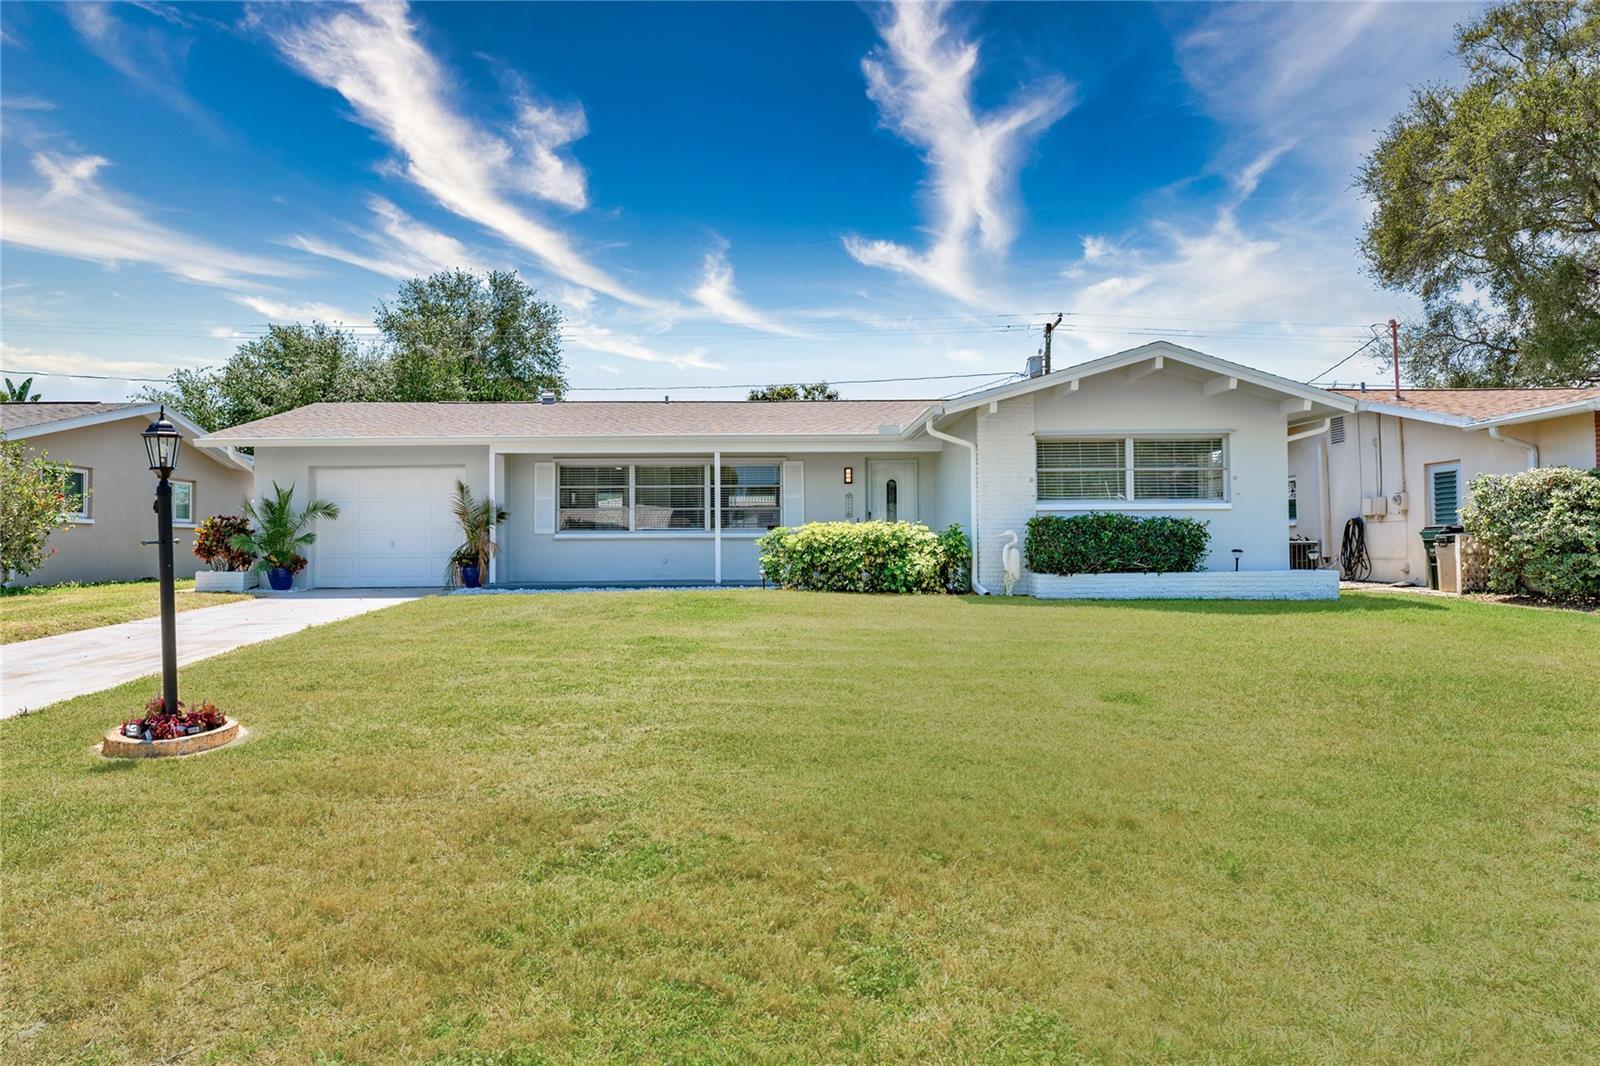 Photo one of 2161 Pine Ridge Dr Clearwater FL 33763 | MLS T3519012